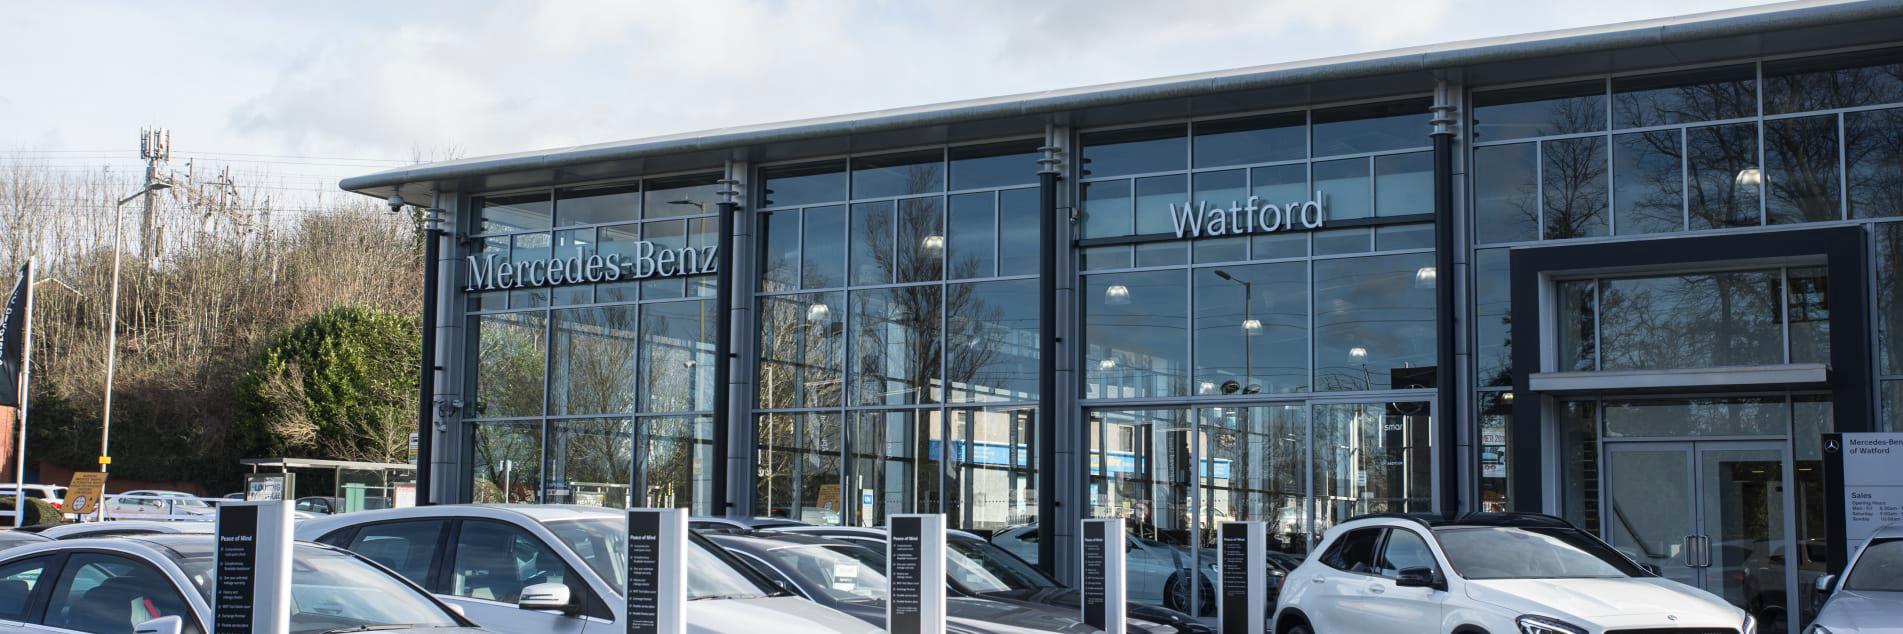 Images Mercedes-Benz of Watford